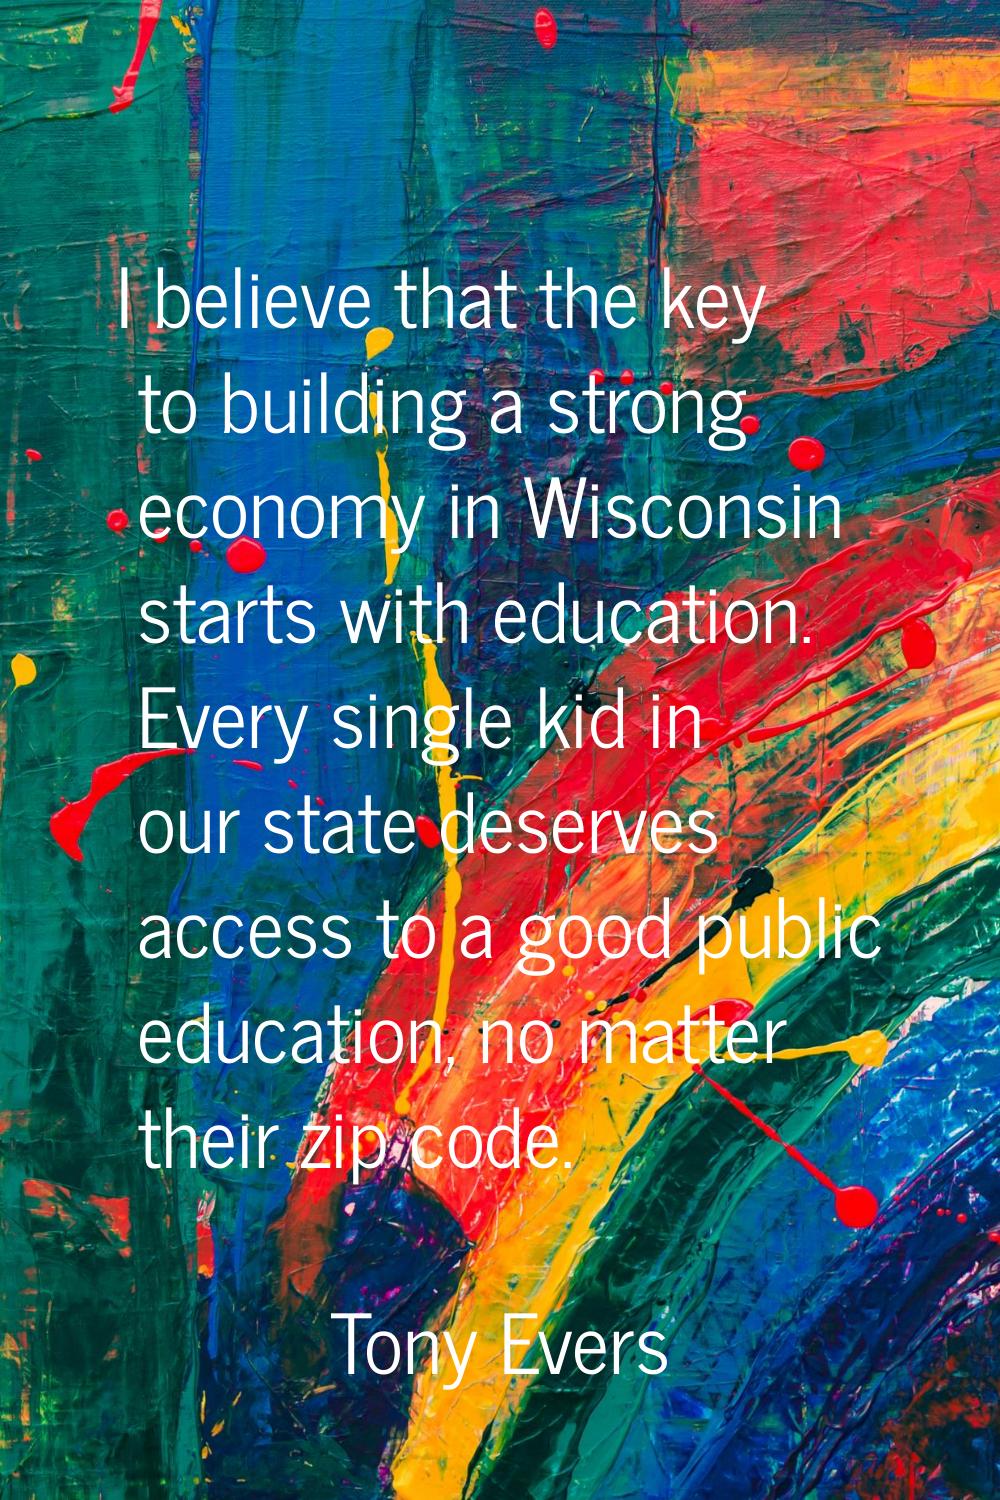 I believe that the key to building a strong economy in Wisconsin starts with education. Every singl